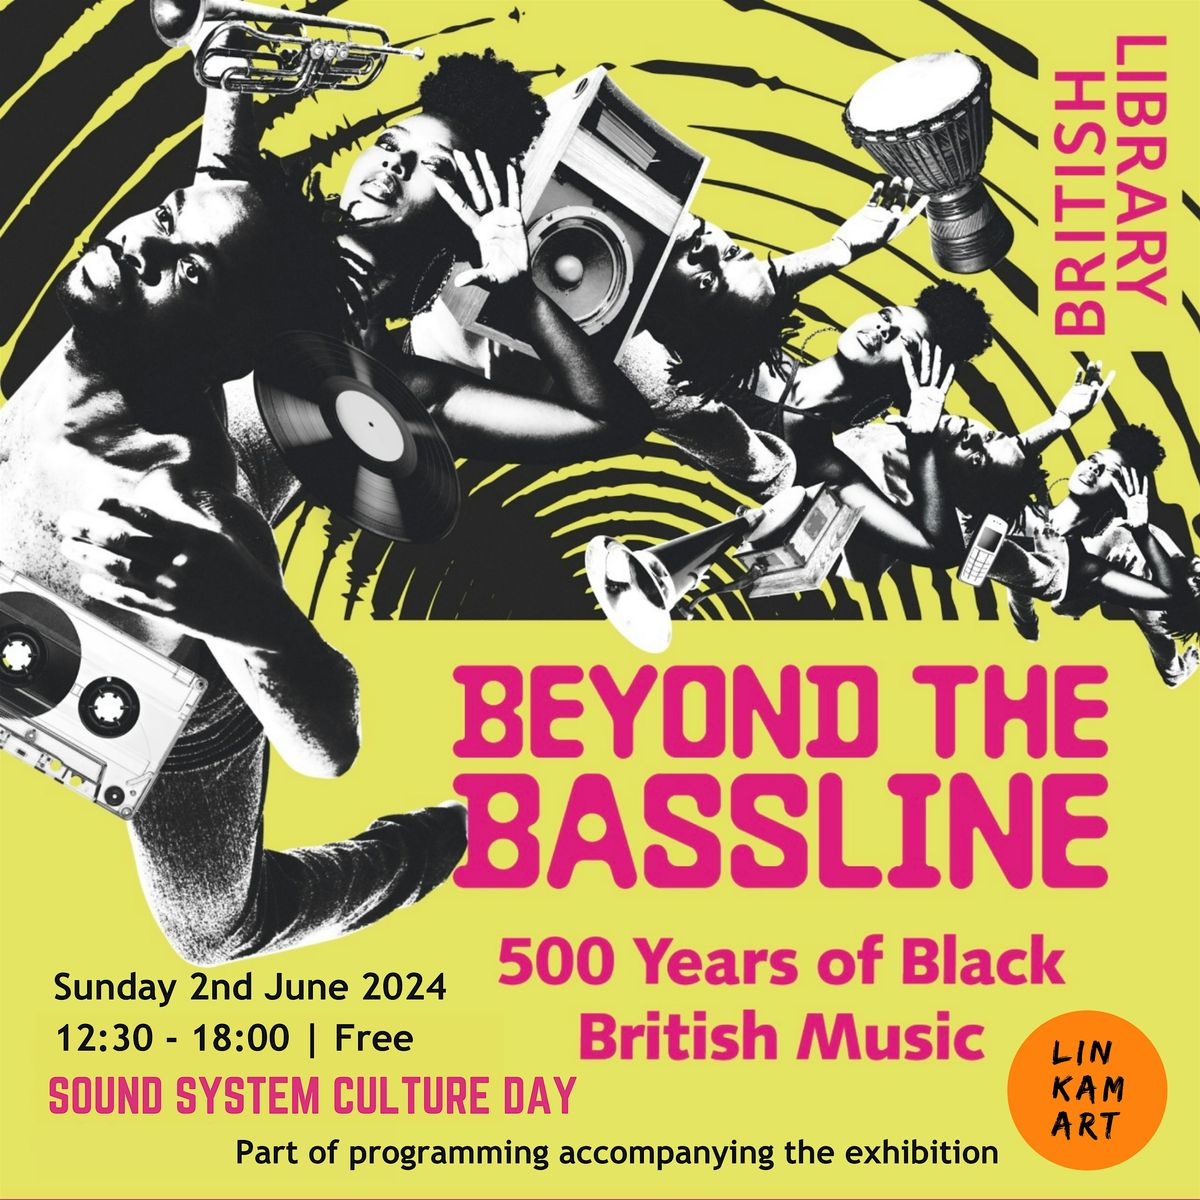 SOUND SYSTEM CULTURE DAY HOSTED BY LIN KAM ART AT THE BRITISH LIBRARY